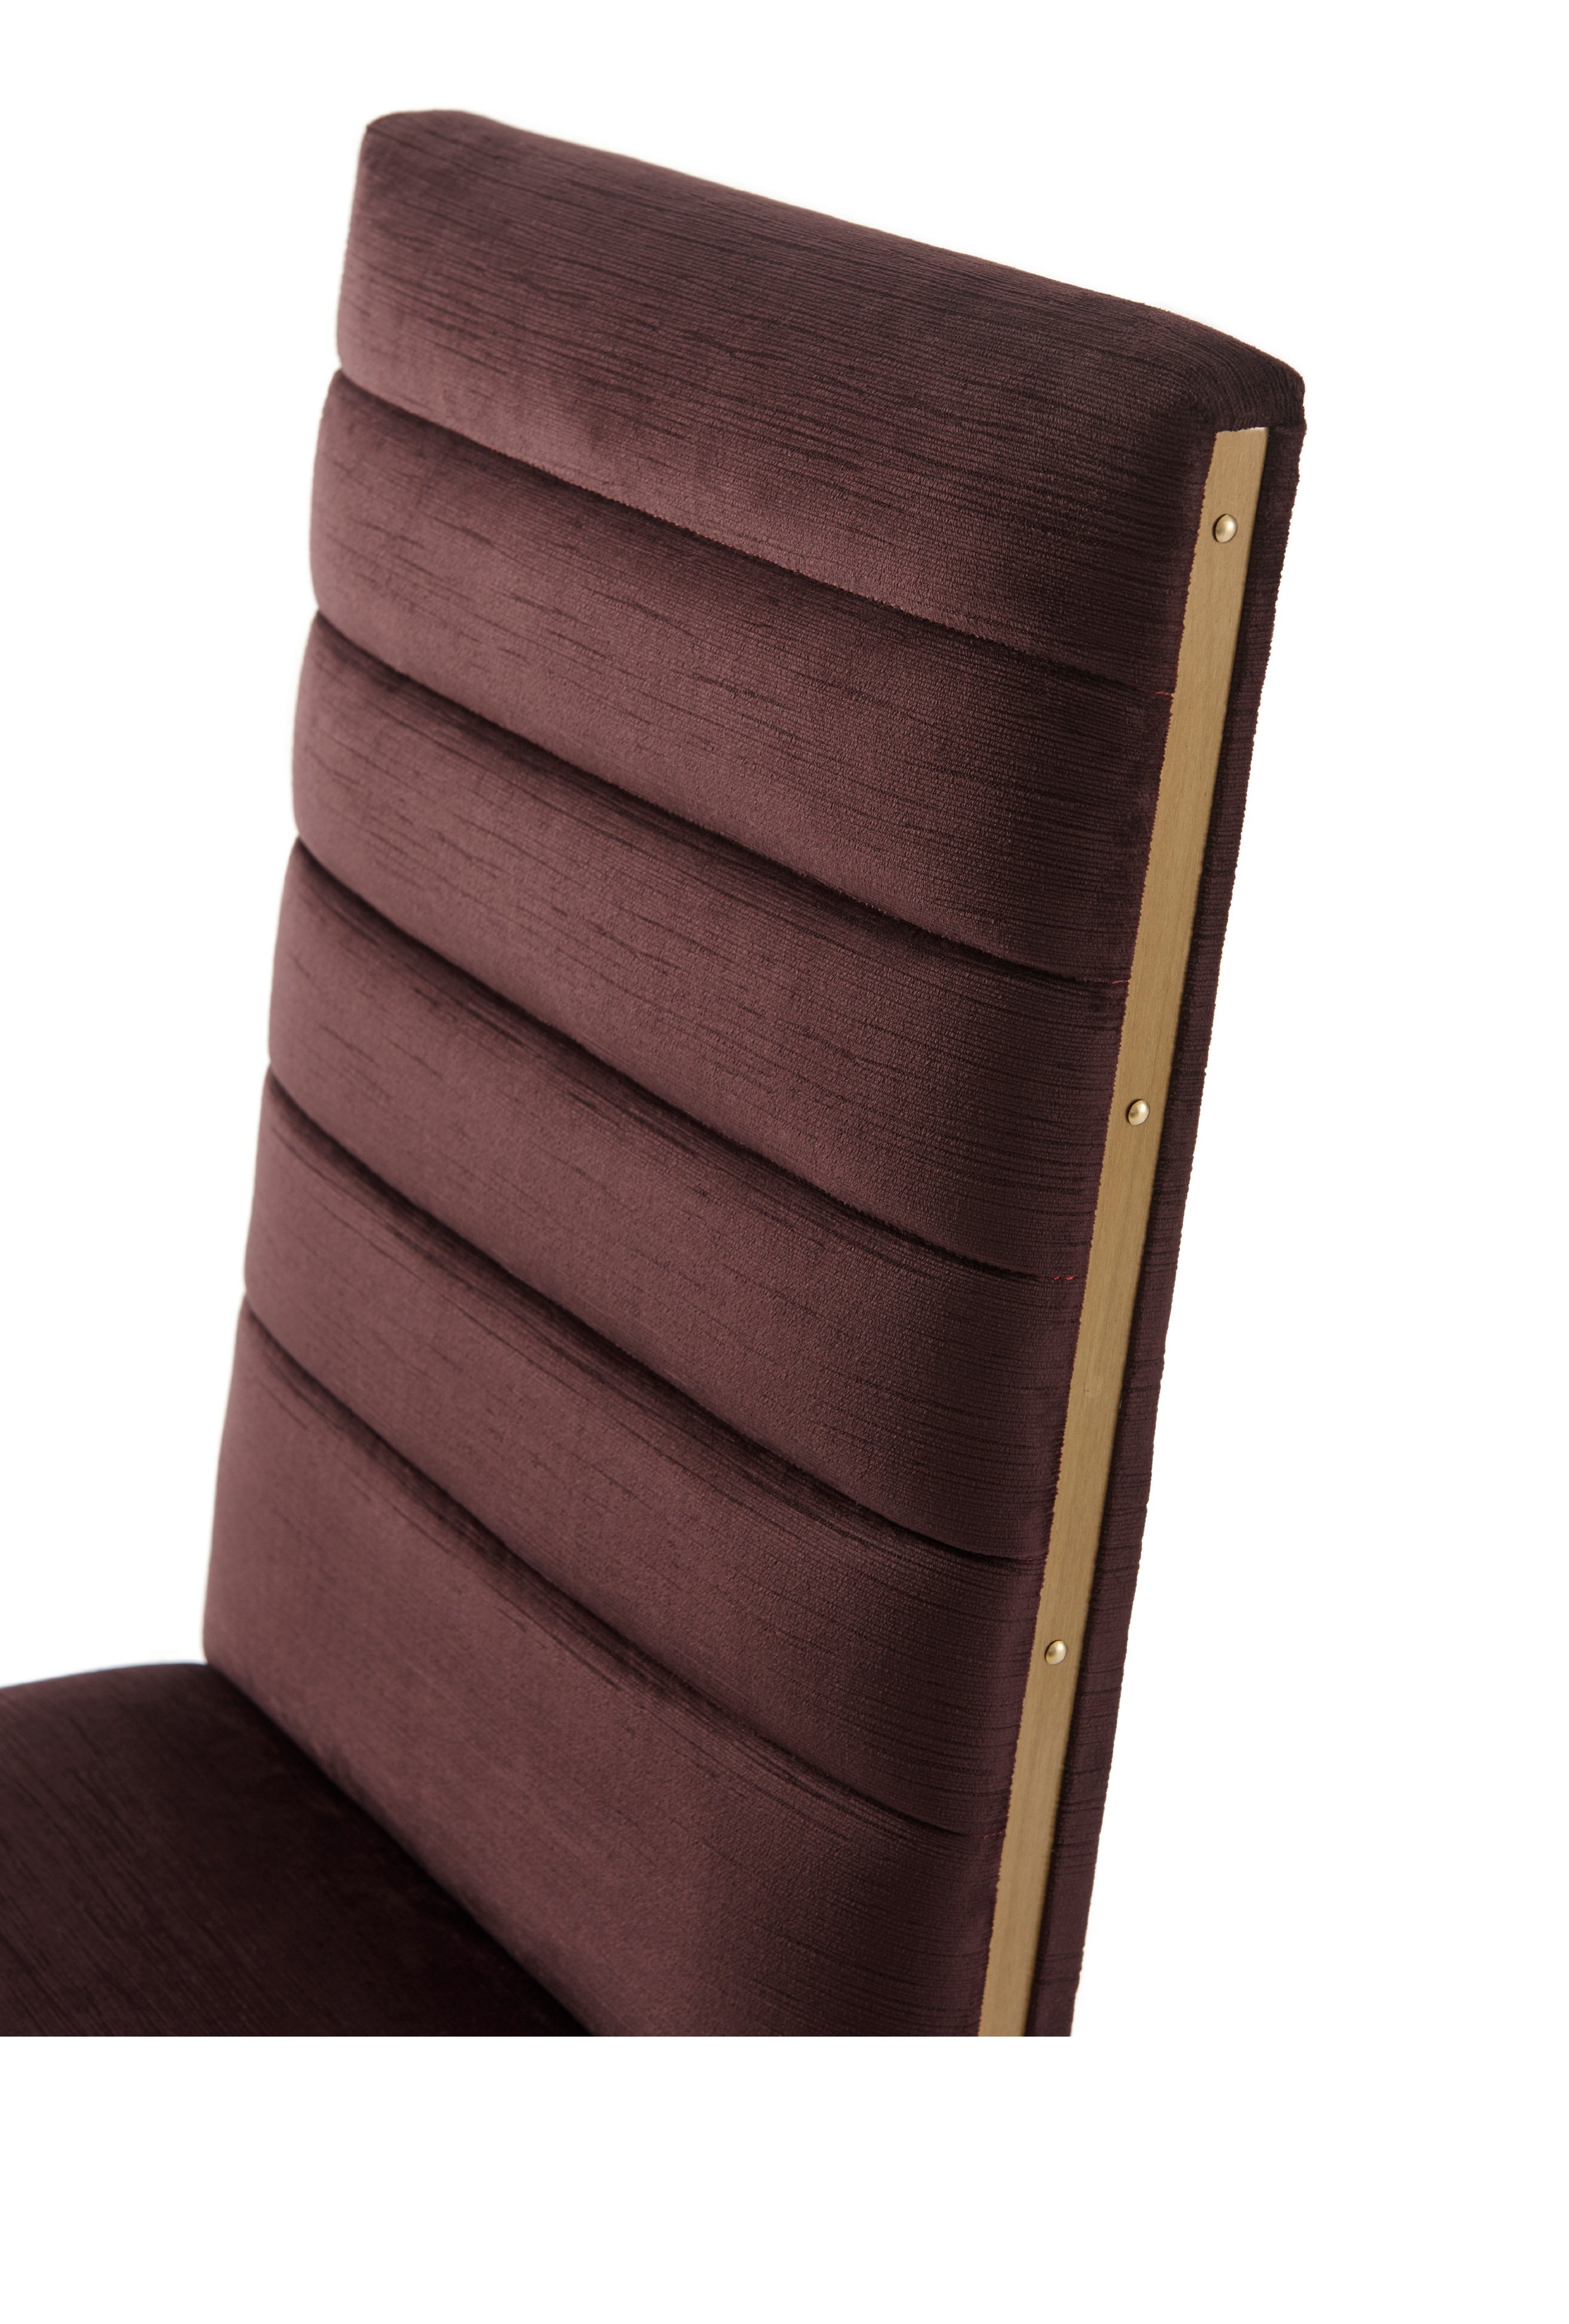 Roque Dining side chair